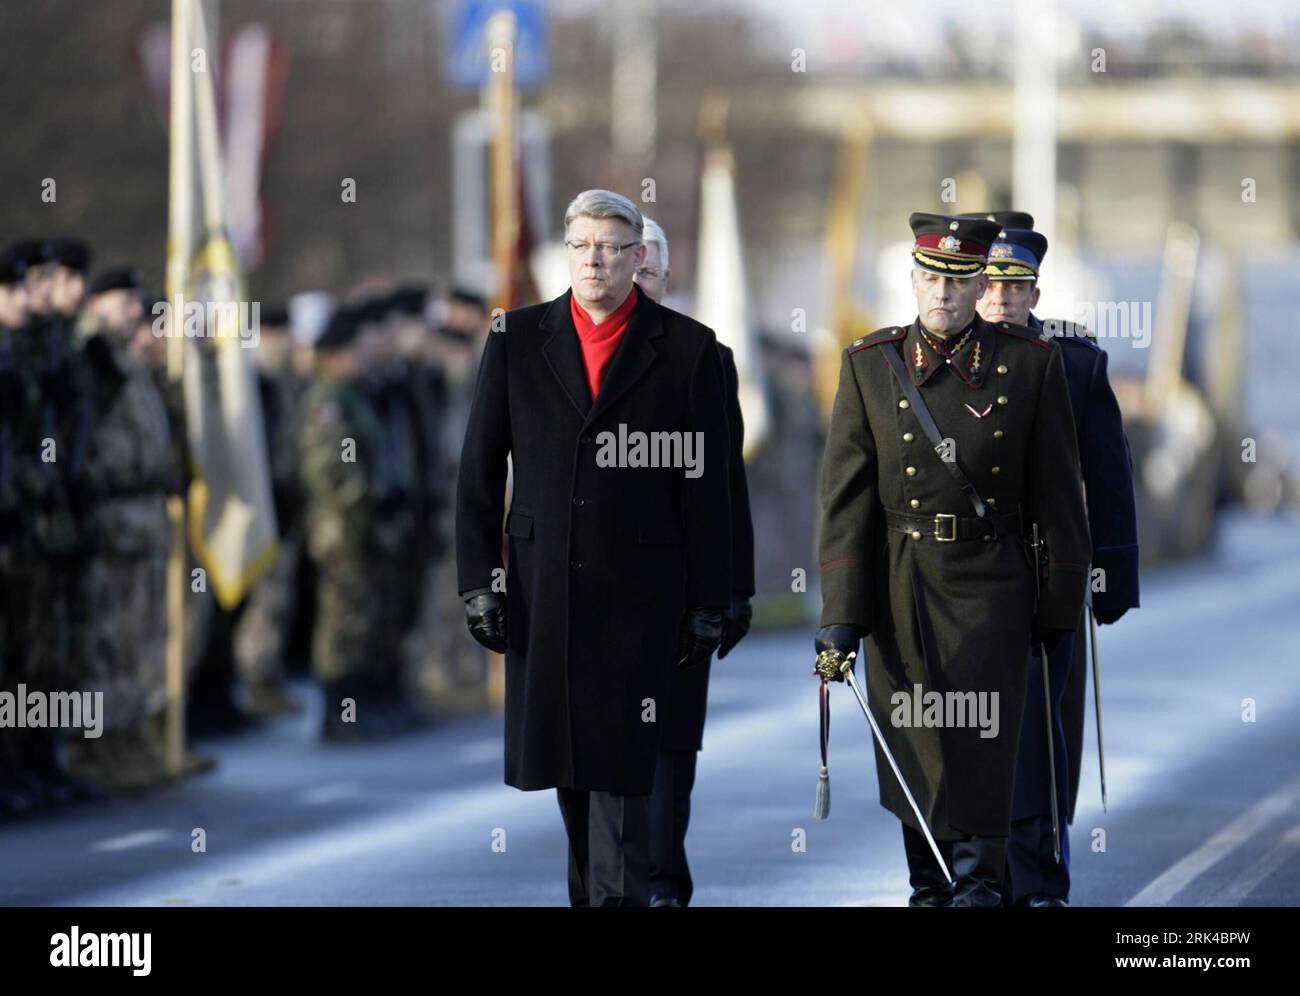 Bildnummer: 53610035  Datum: 18.11.2009  Copyright: imago/Xinhua (091118) -- RIGA, Nov. 18, 2009 (Xinhua) -- Latvian President Valdis Zatlers (L front) reviews the army during a military parade marking the 91st anniversary of the Latvia s independence in Riga, capital of Latvia, Nov. 18, 2009. Latvia declared independence on Nov. 18, 1918 at the end of World War I. It joined the former Soviet Union in 1940 and declared restoration of independence on Aug. 22, 1991, before the breakup of the Soviet Union. (Xinhua/Yang Dehong) (gxr) (3)LATVIA-INDEPENDENCE DAY PUBLICATIONxNOTxINxCHN People Politik Stock Photo